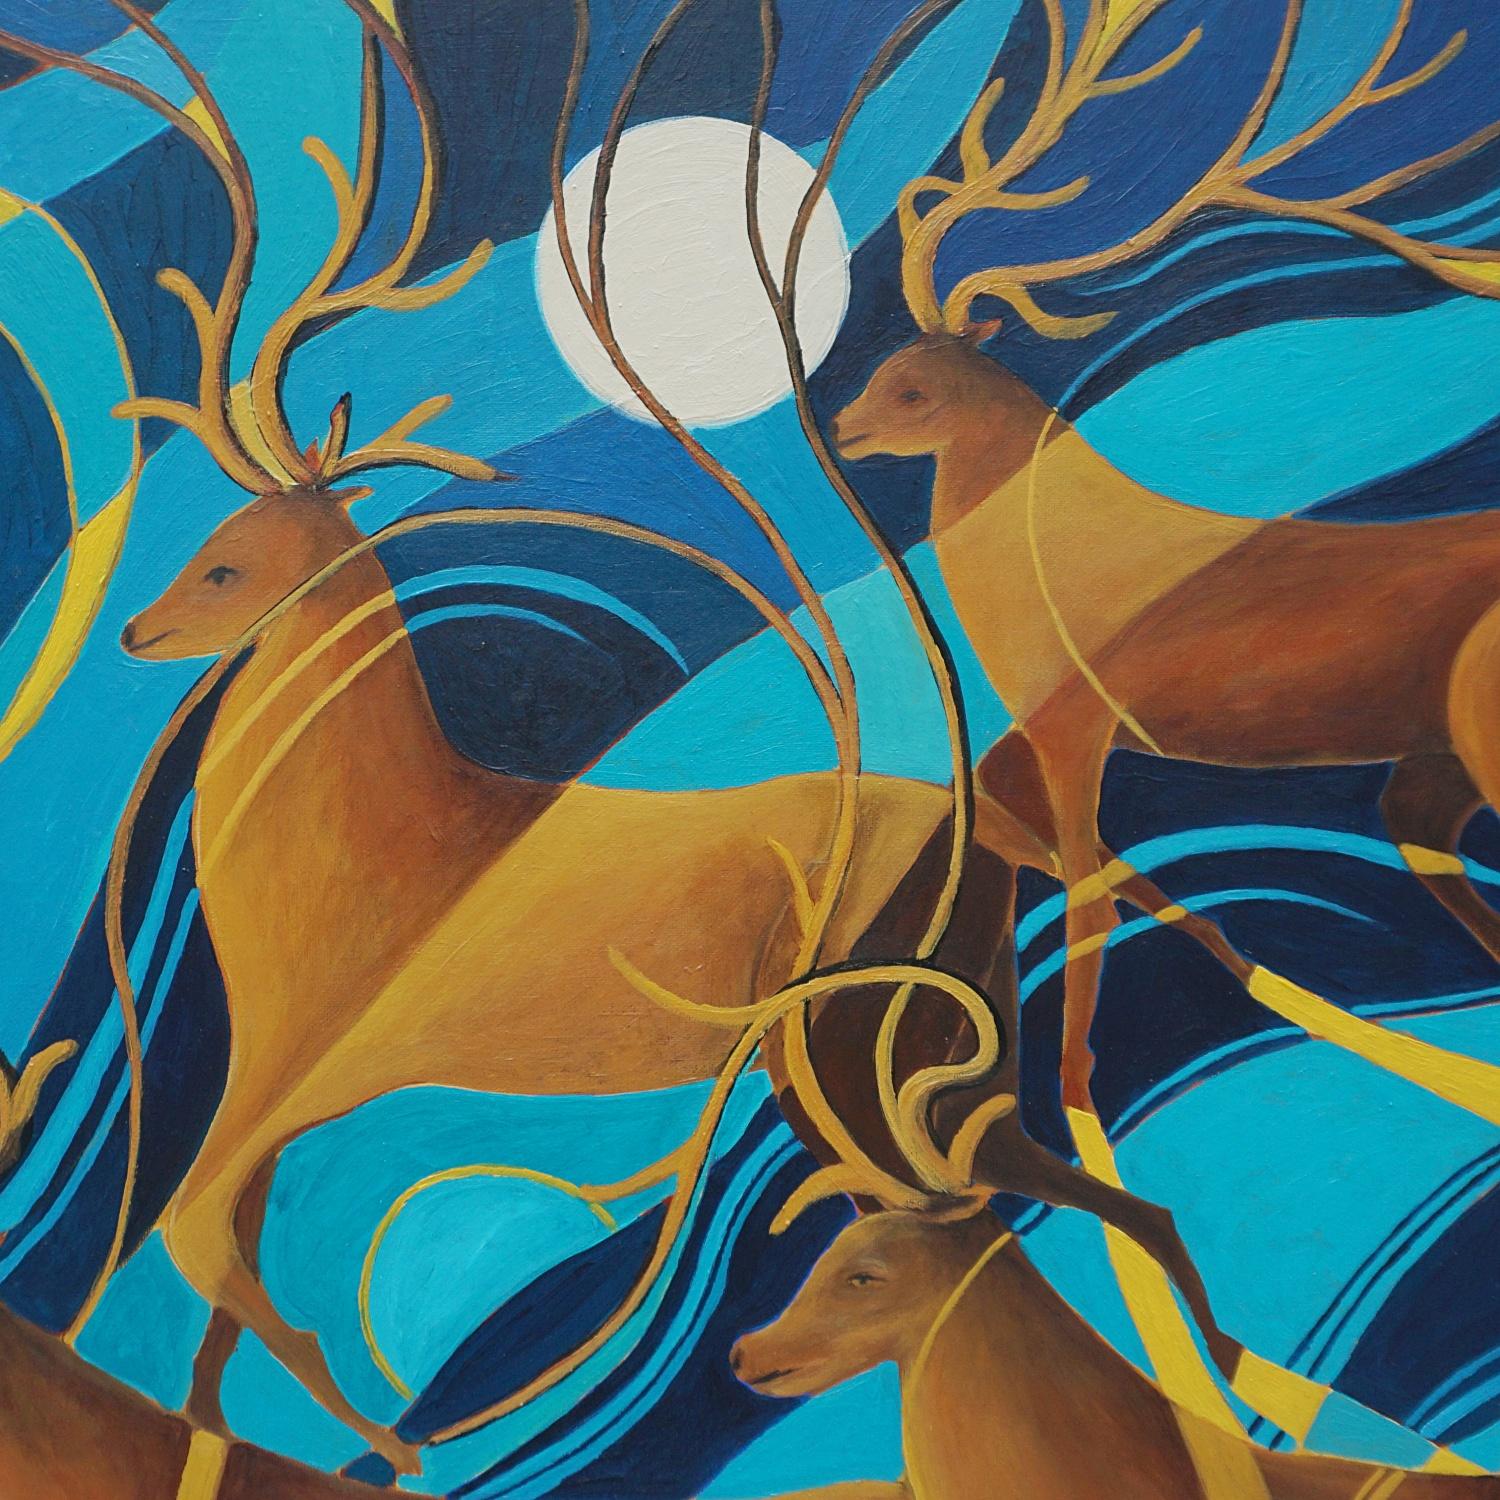 'Full Moon With Deer' An Art Deco style contemporary painting by Vera Jefferson depicting galloping deer amongst a stylised background. Signed V Jefferson to lower right. 

Dimensions: H 94.5cm W 94.5cm

 Vera Jefferson trained at Goldsmiths